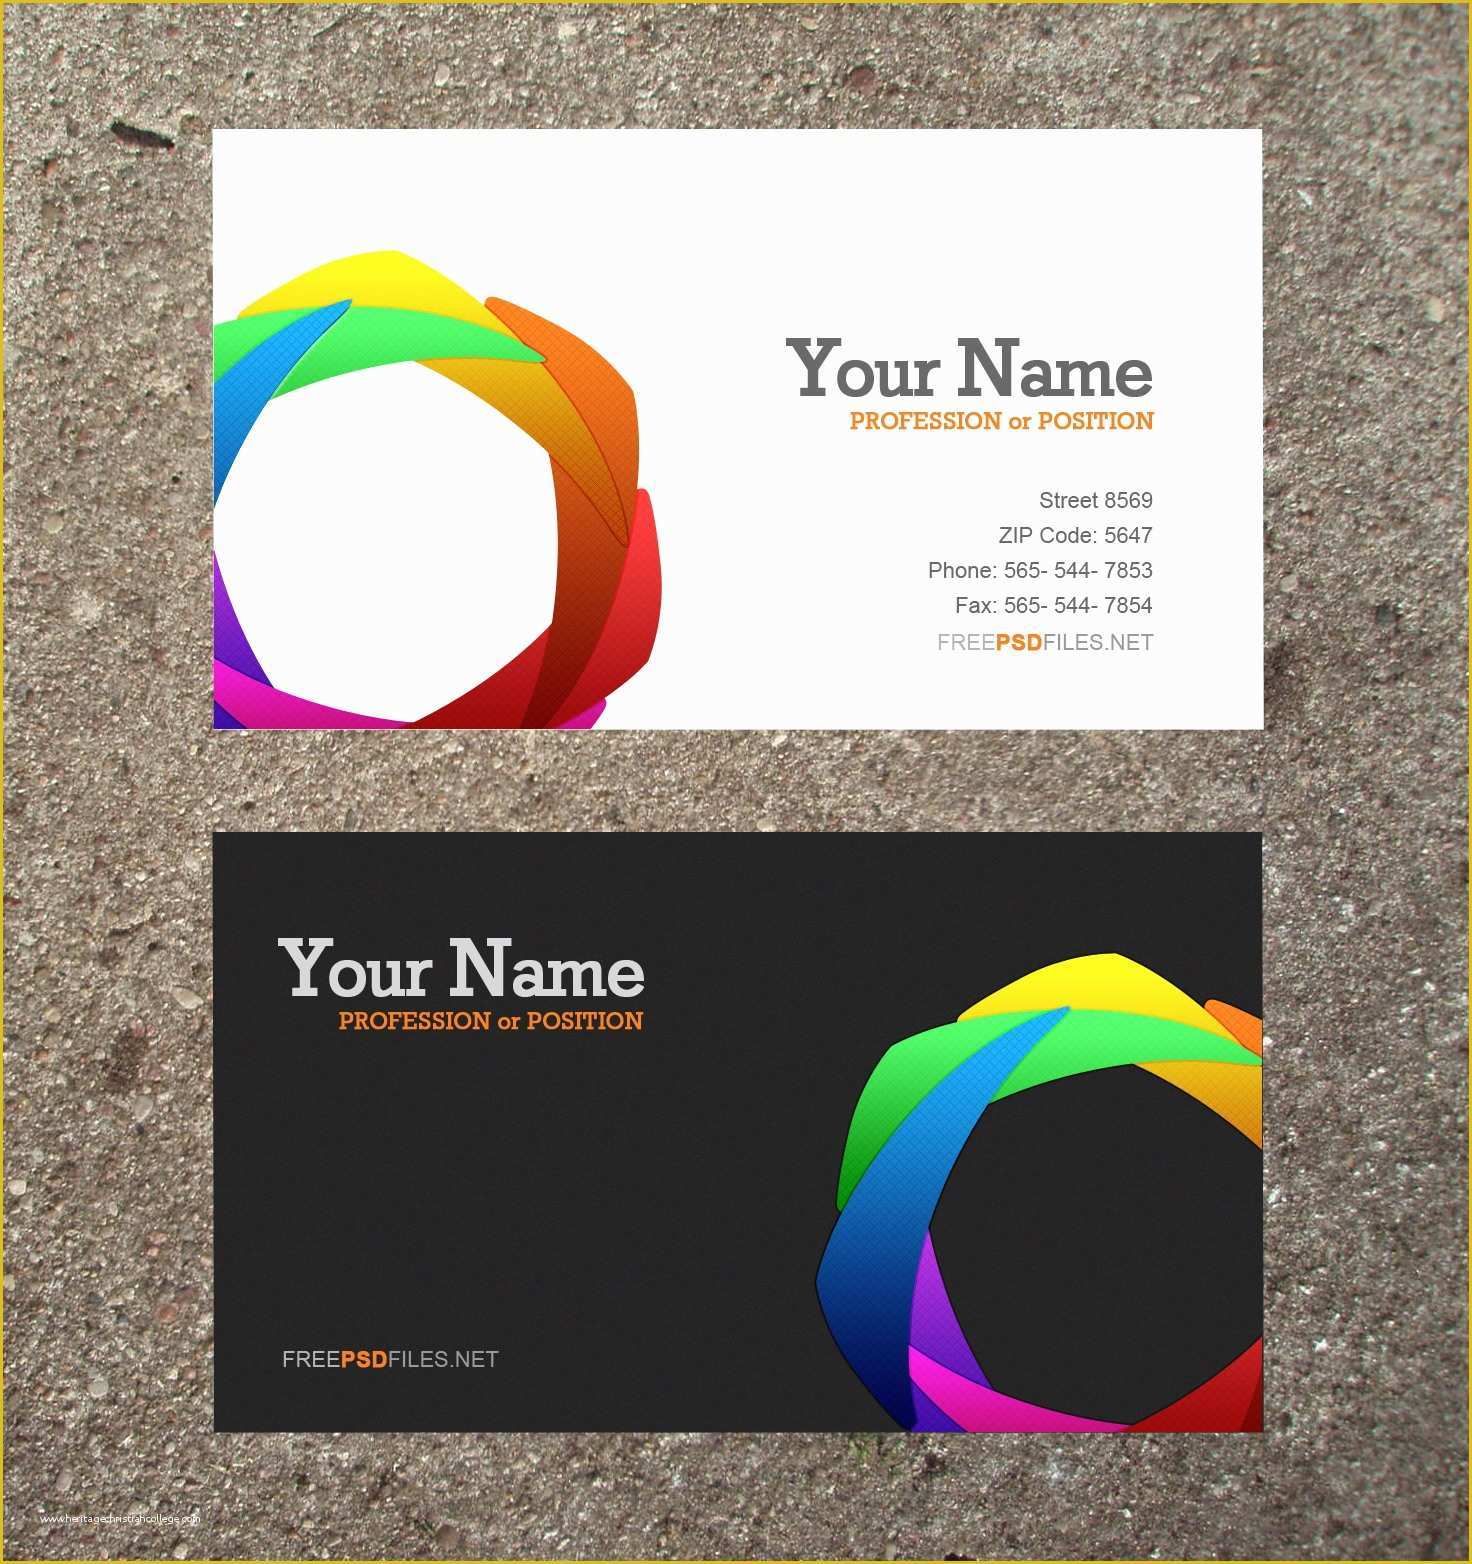 Free Online Business Card Template Of 20 Free Psd Business Card Templates Free Business